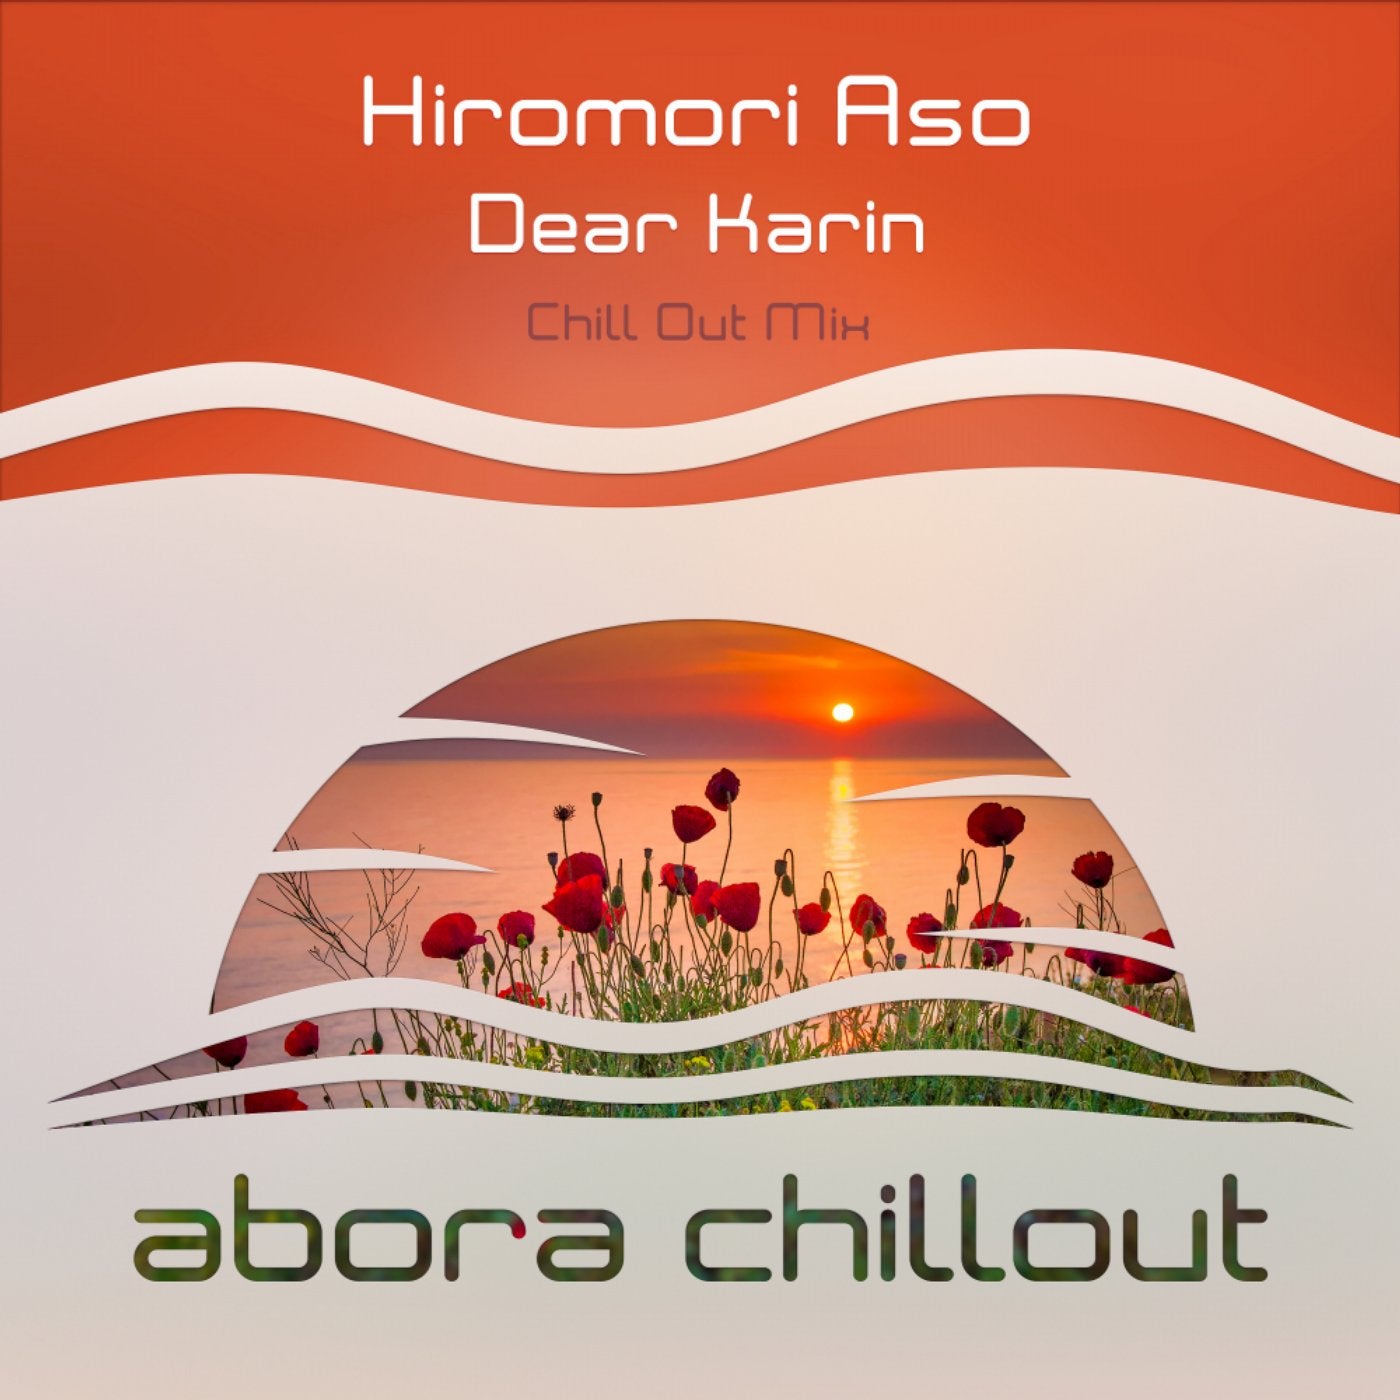 Dear Karin (Chill Out Mix)